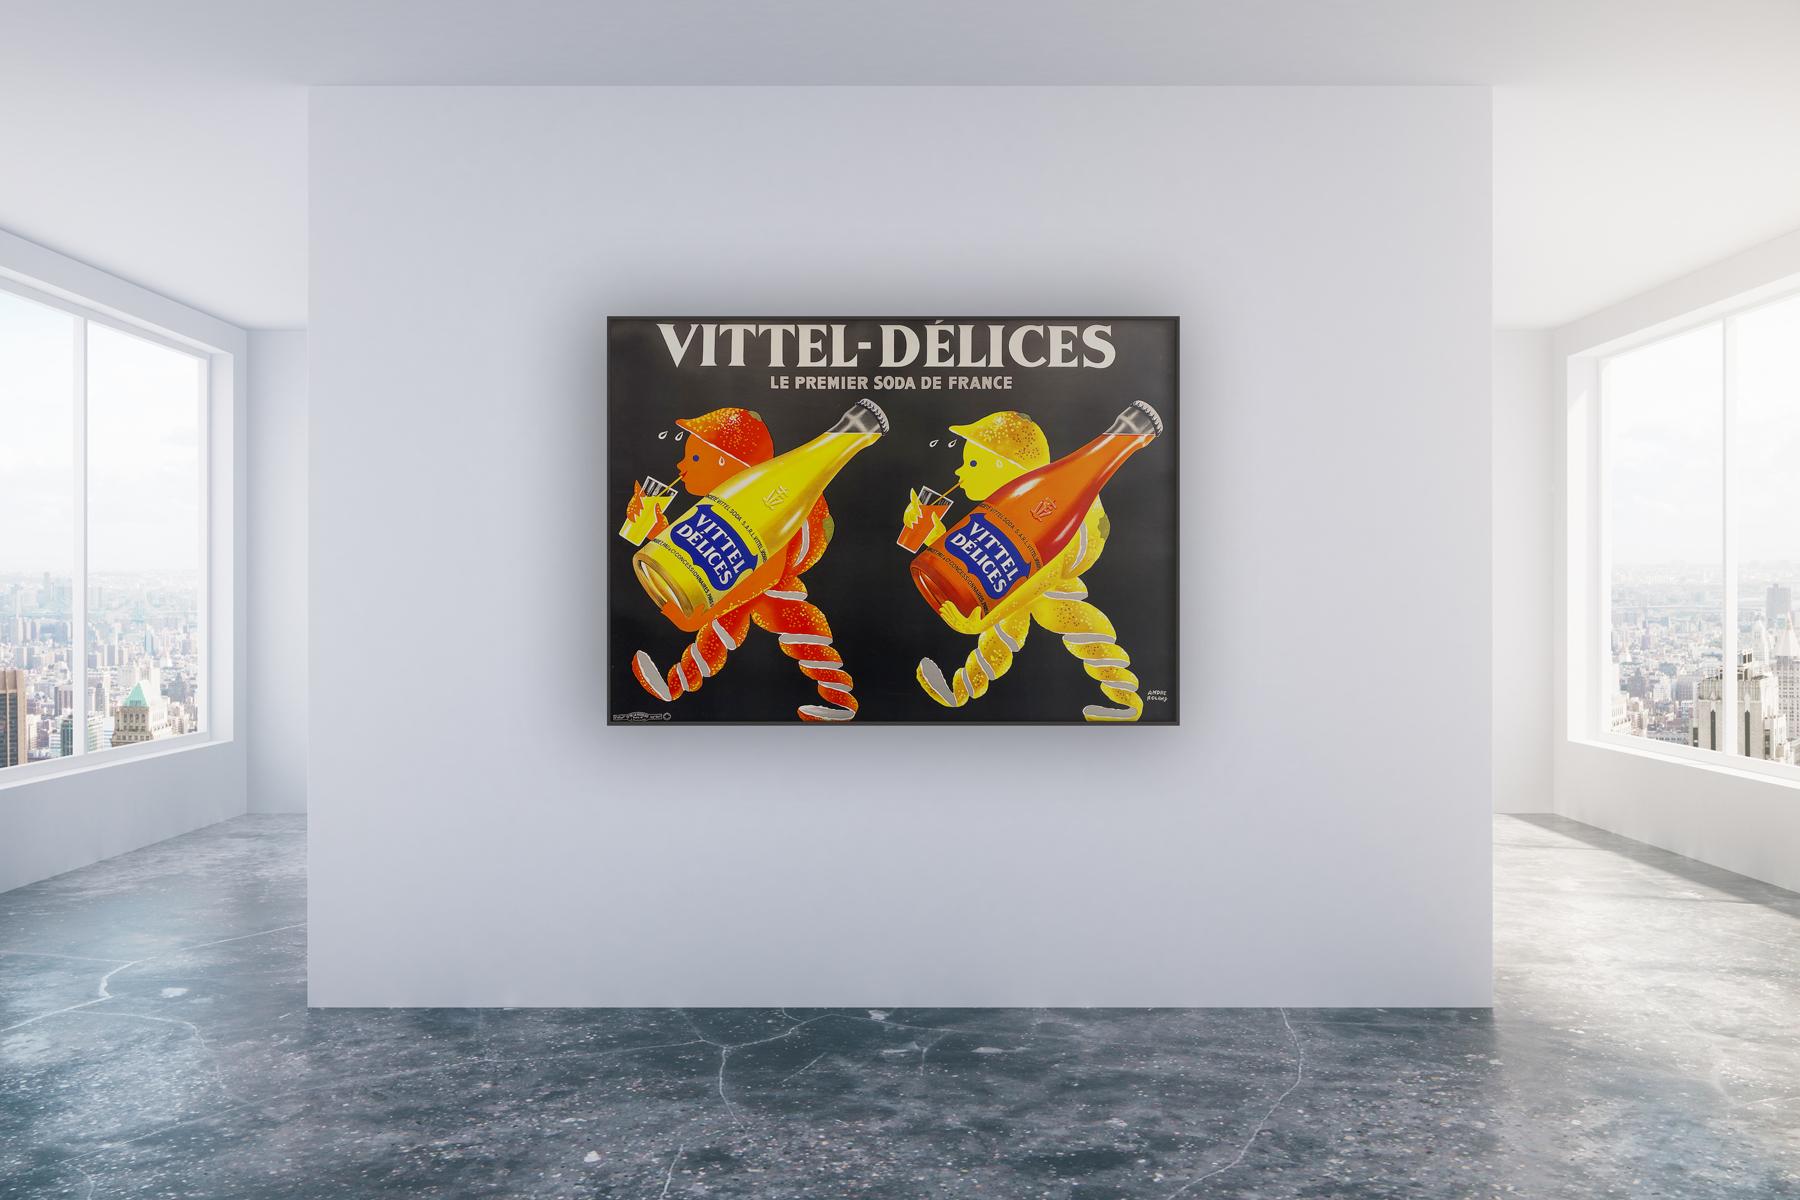 Original vintage French advertising poster for Vittel Delices, the premium French delicious citrus fruit drink. Designed by André Roland, The fruity fun design certainly pops!

This vintage poster is sized 61 x 46 inches and in Rolled Linen-Backed